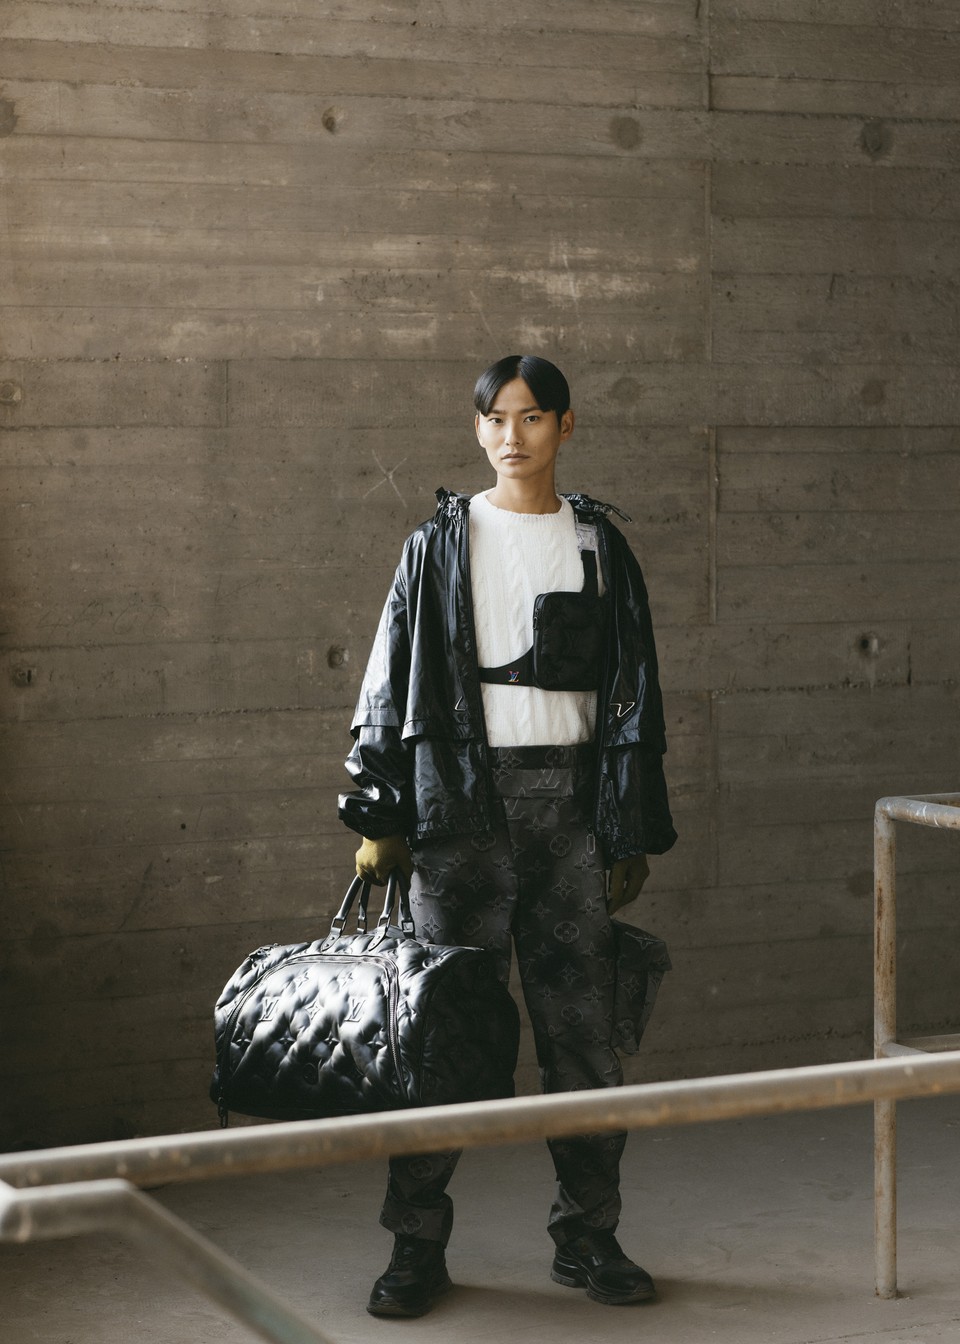 Virgil Abloh Explores the Future With New Louis Vuitton 2054 Collection